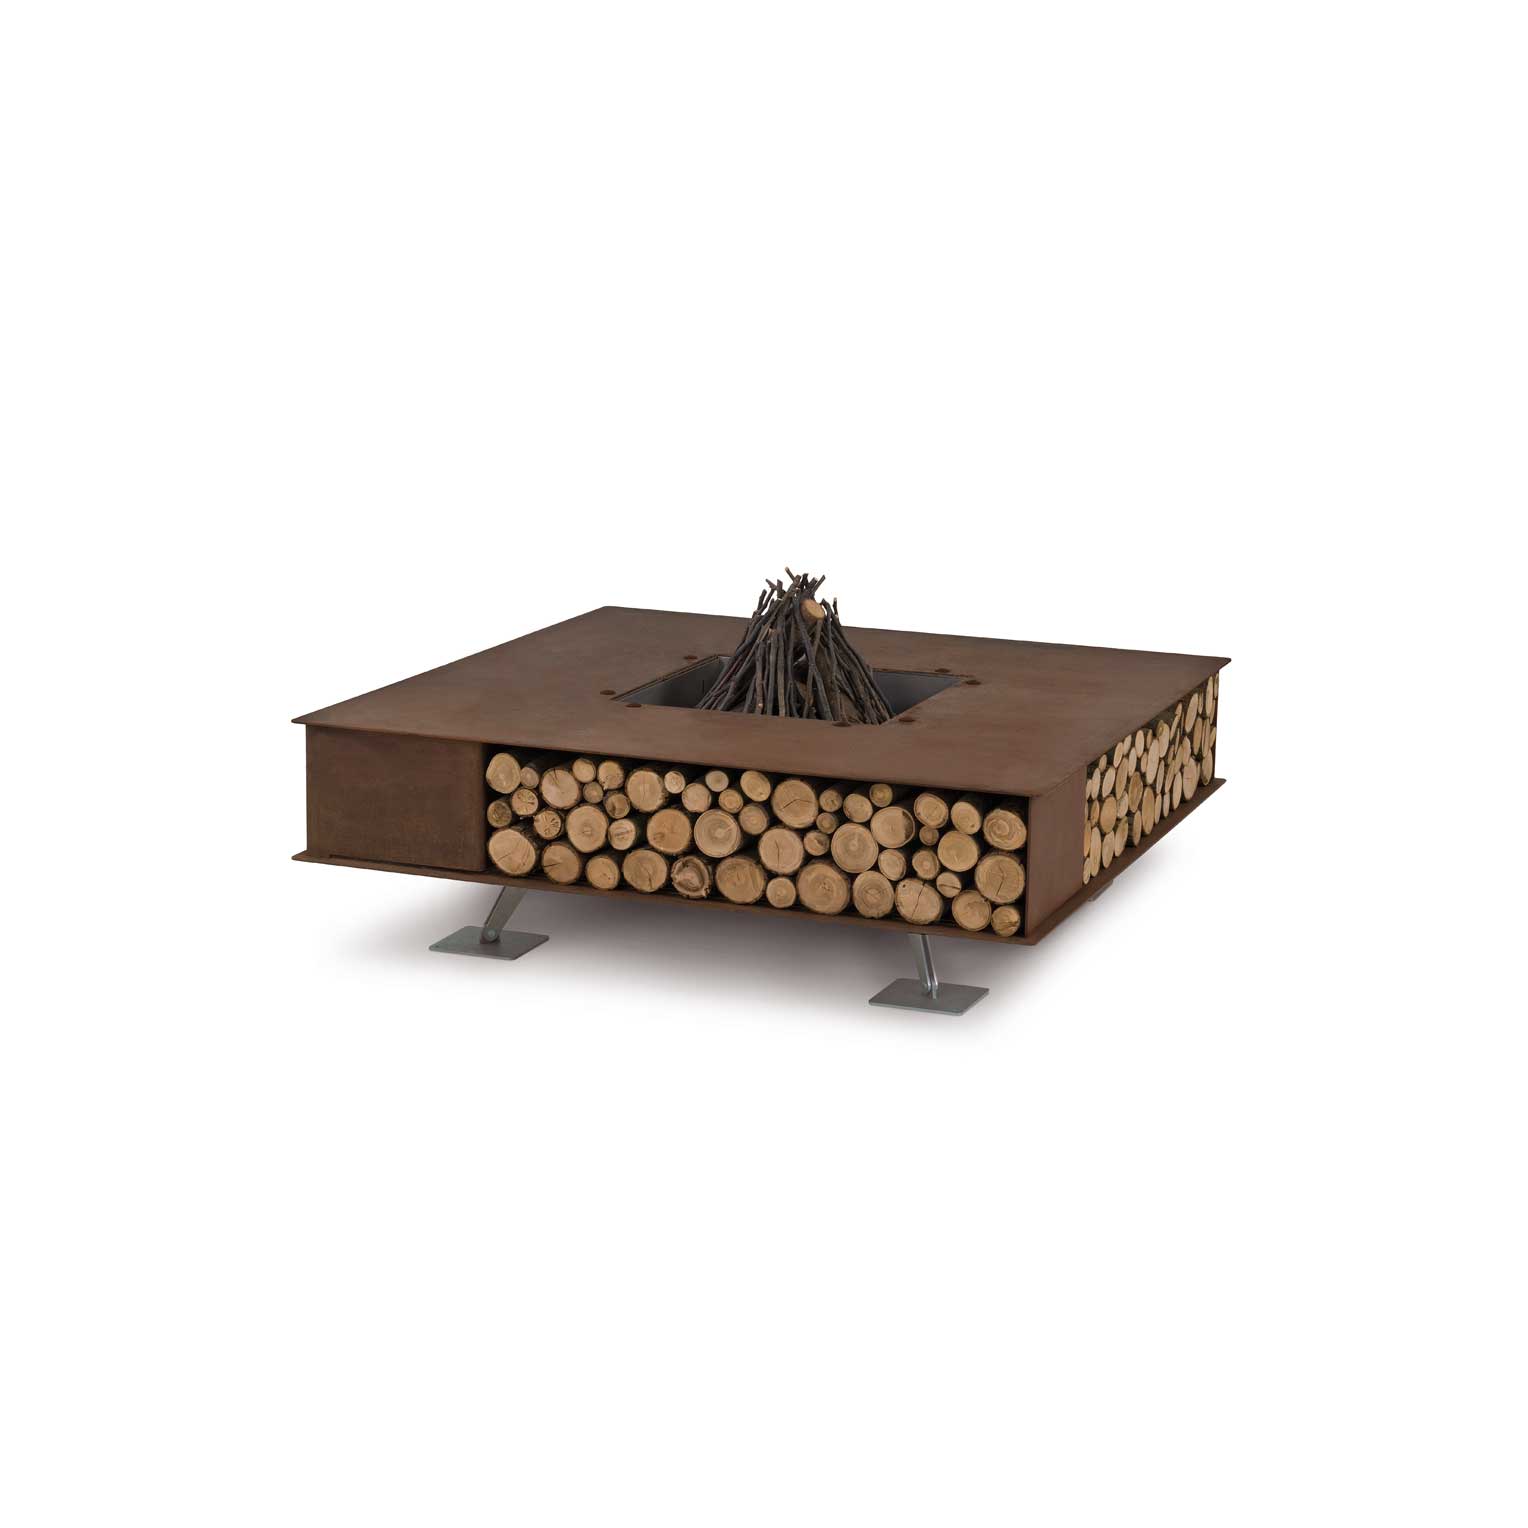 Toast Outdoor Design fire pit